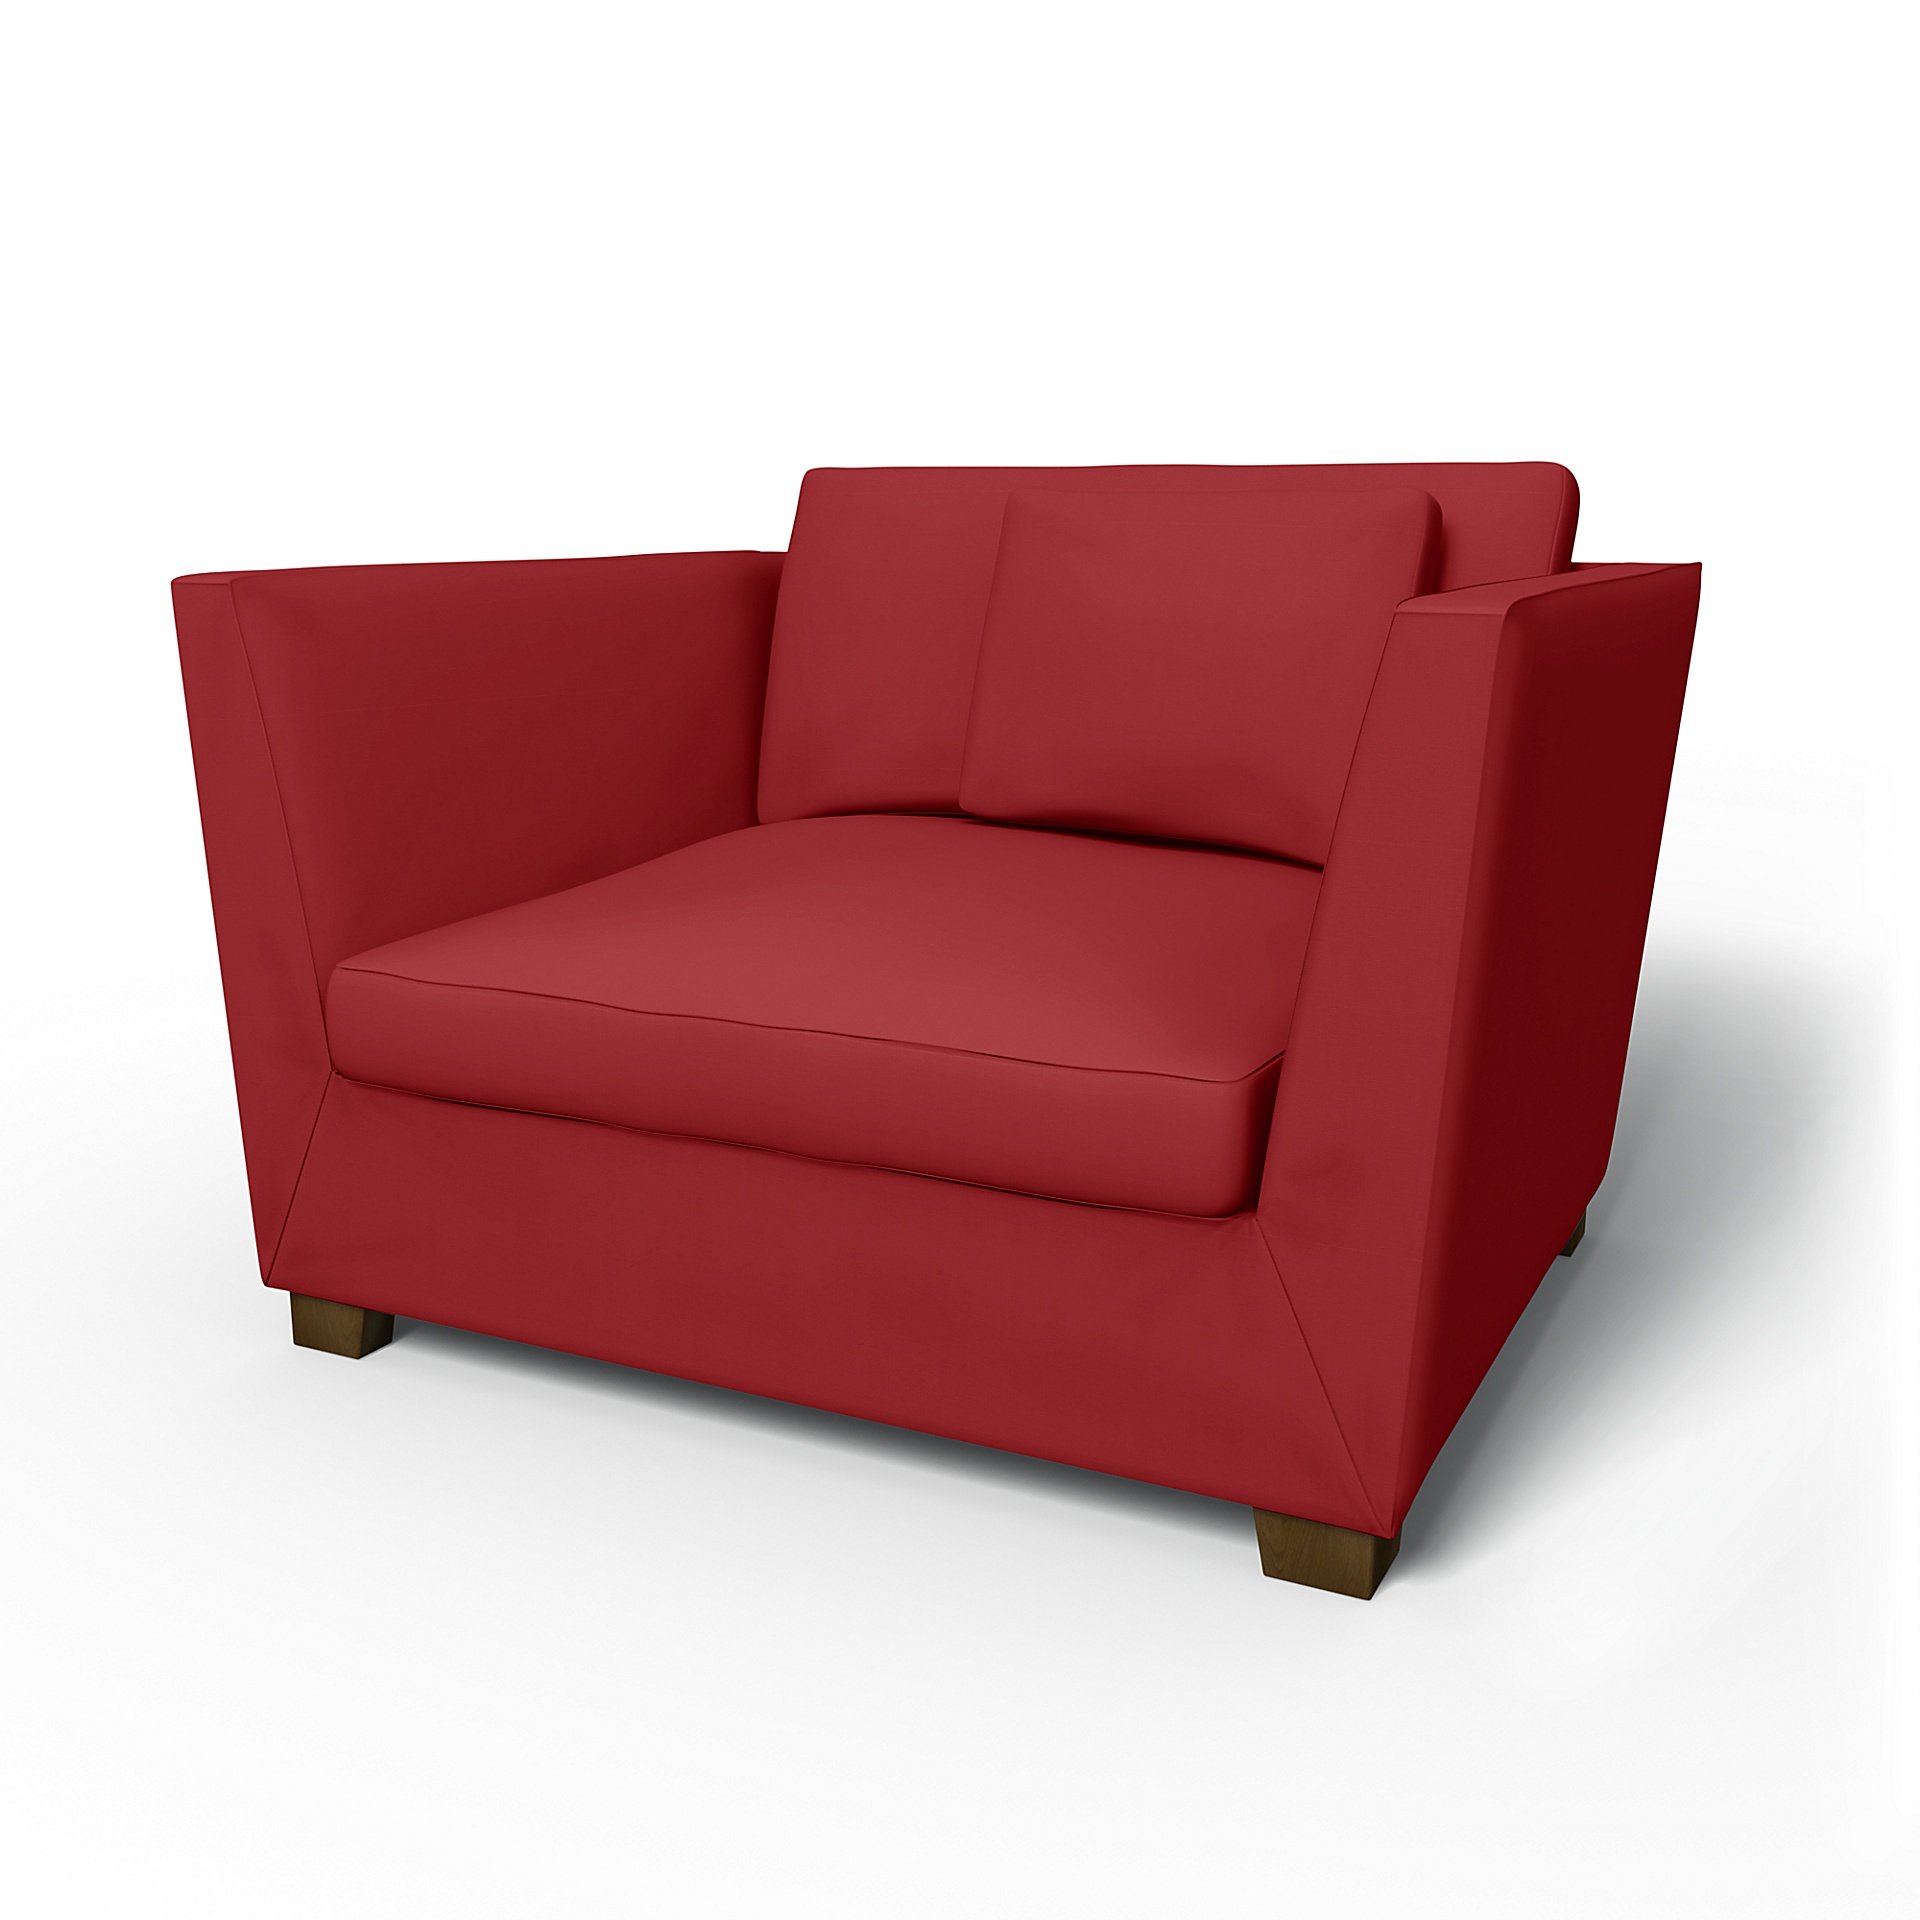 IKEA - Stockholm Armchair Cover, Scarlet Red, Cotton - Bemz